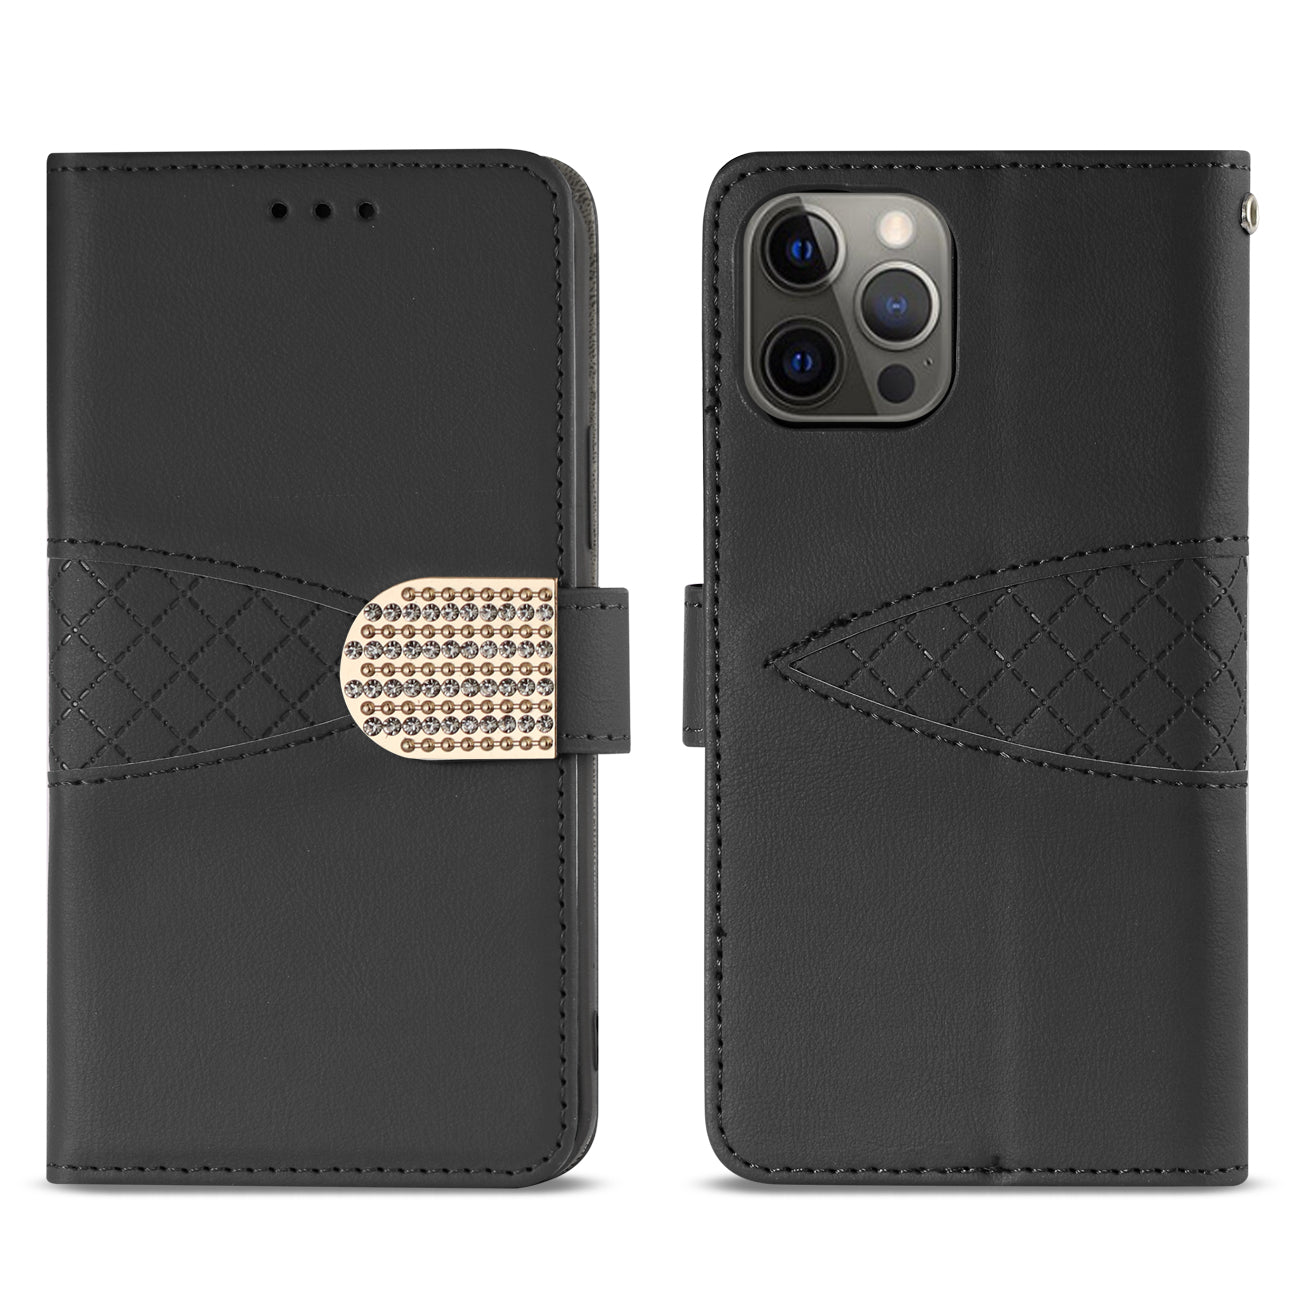 3-In-1 Wallet Case for IPHONE 12/ IPHONE 12 PRO In Black